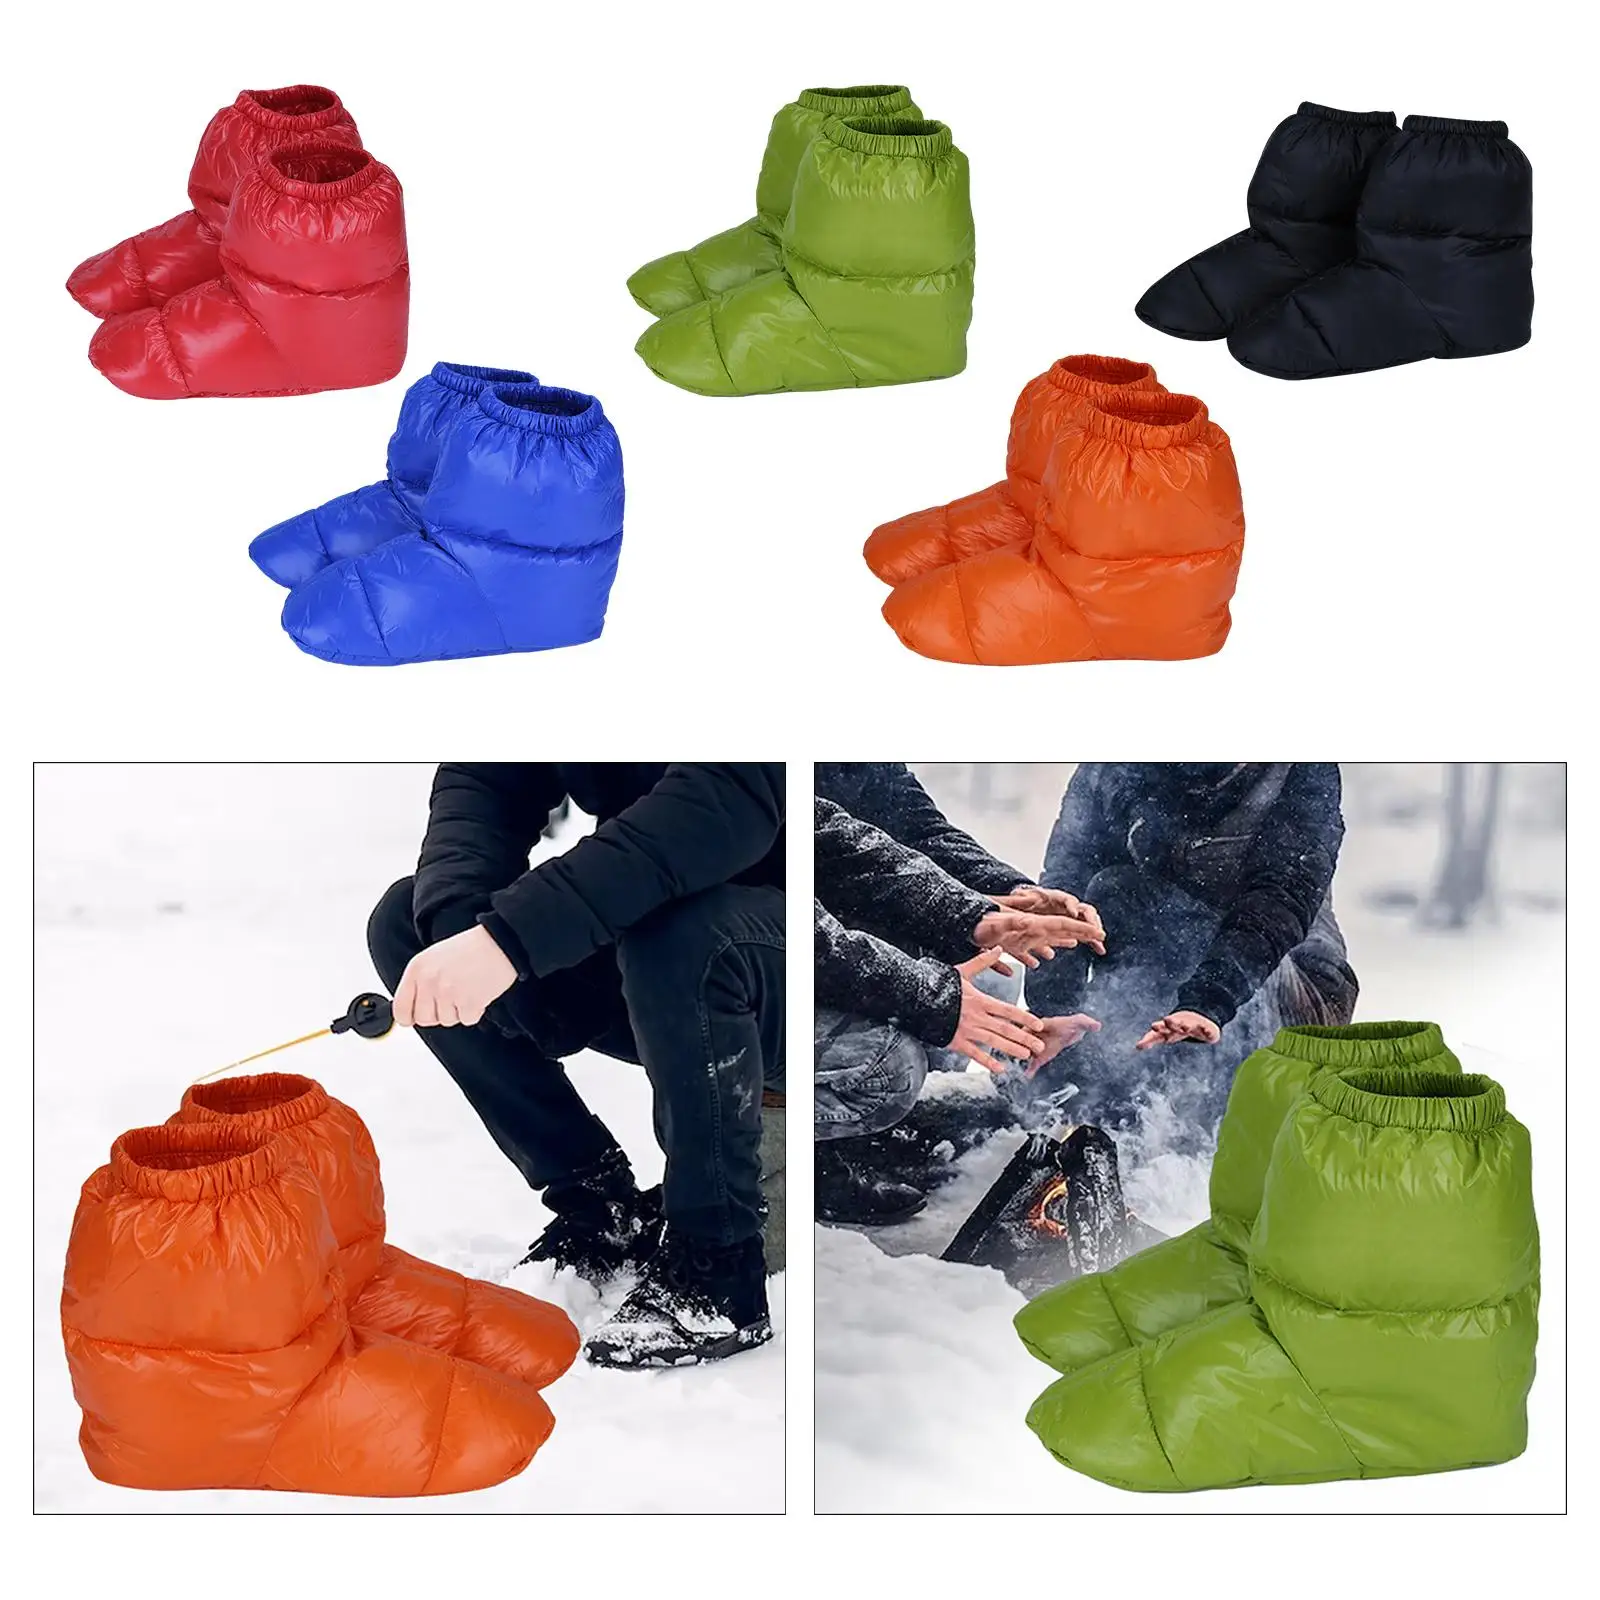 Winter Down Slippers Bootie Shoes Waterproof Adults Keep Warm Soft Lightweight Footwear for Office Bedroom Hiking Skiing Camping